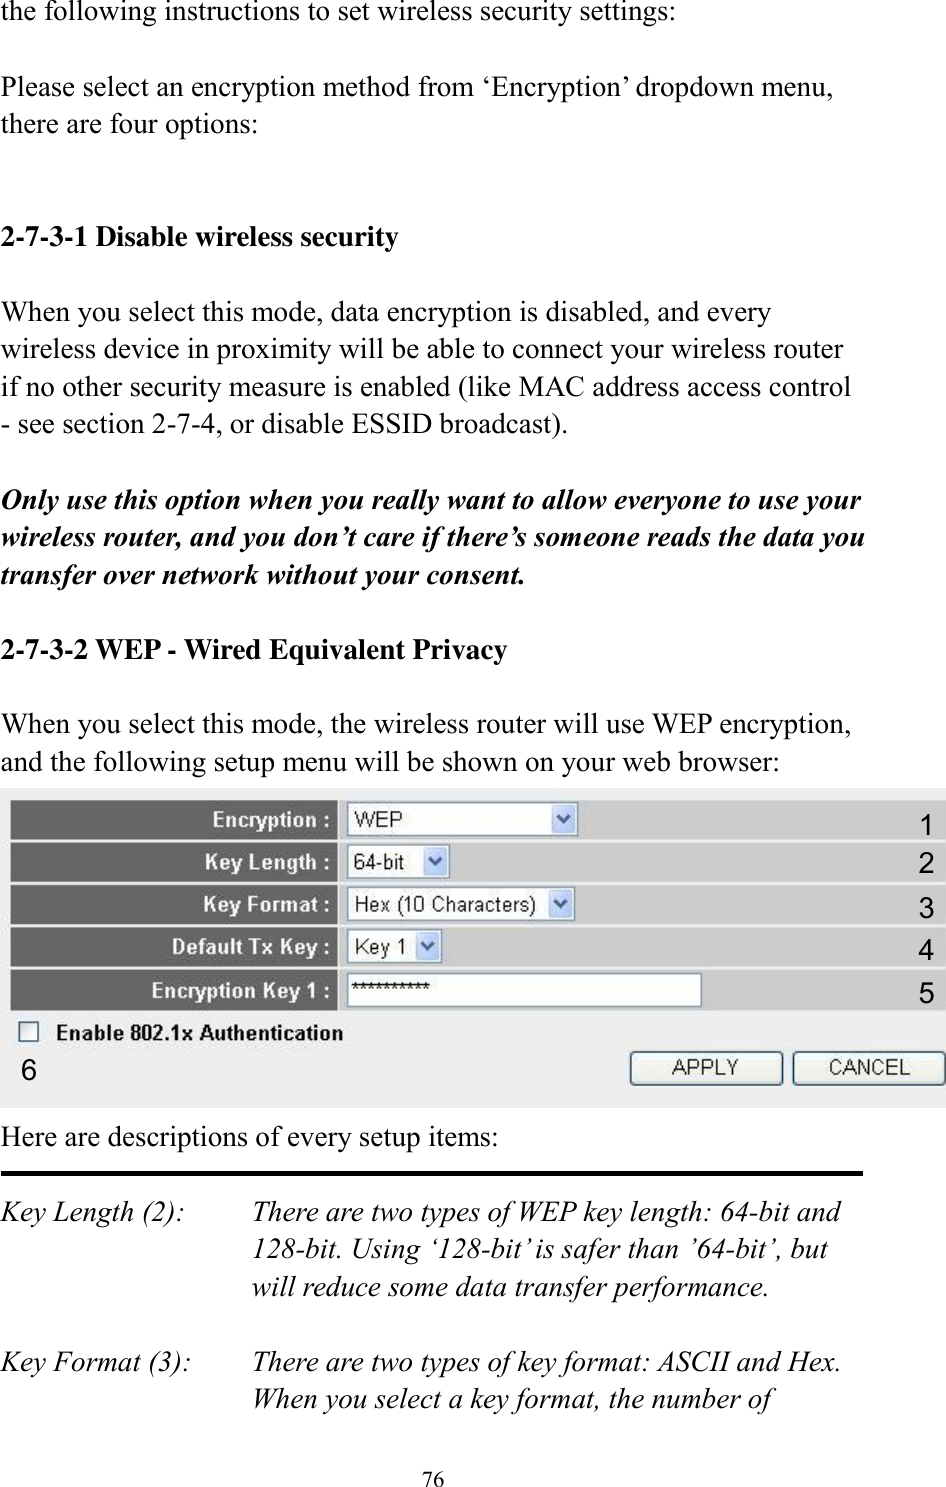 76 the following instructions to set wireless security settings:  Please select an encryption method from ‘Encryption’ dropdown menu, there are four options:   2-7-3-1 Disable wireless security  When you select this mode, data encryption is disabled, and every wireless device in proximity will be able to connect your wireless router if no other security measure is enabled (like MAC address access control - see section 2-7-4, or disable ESSID broadcast).    Only use this option when you really want to allow everyone to use your wireless router, and you don’t care if there’s someone reads the data you transfer over network without your consent.  2-7-3-2 WEP - Wired Equivalent Privacy  When you select this mode, the wireless router will use WEP encryption, and the following setup menu will be shown on your web browser:  Here are descriptions of every setup items:  Key Length (2):    There are two types of WEP key length: 64-bit and 128-bit. Using ‘128-bit’ is safer than ’64-bit’, but will reduce some data transfer performance.  Key Format (3):    There are two types of key format: ASCII and Hex. When you select a key format, the number of 1 2 3 5 6 4 